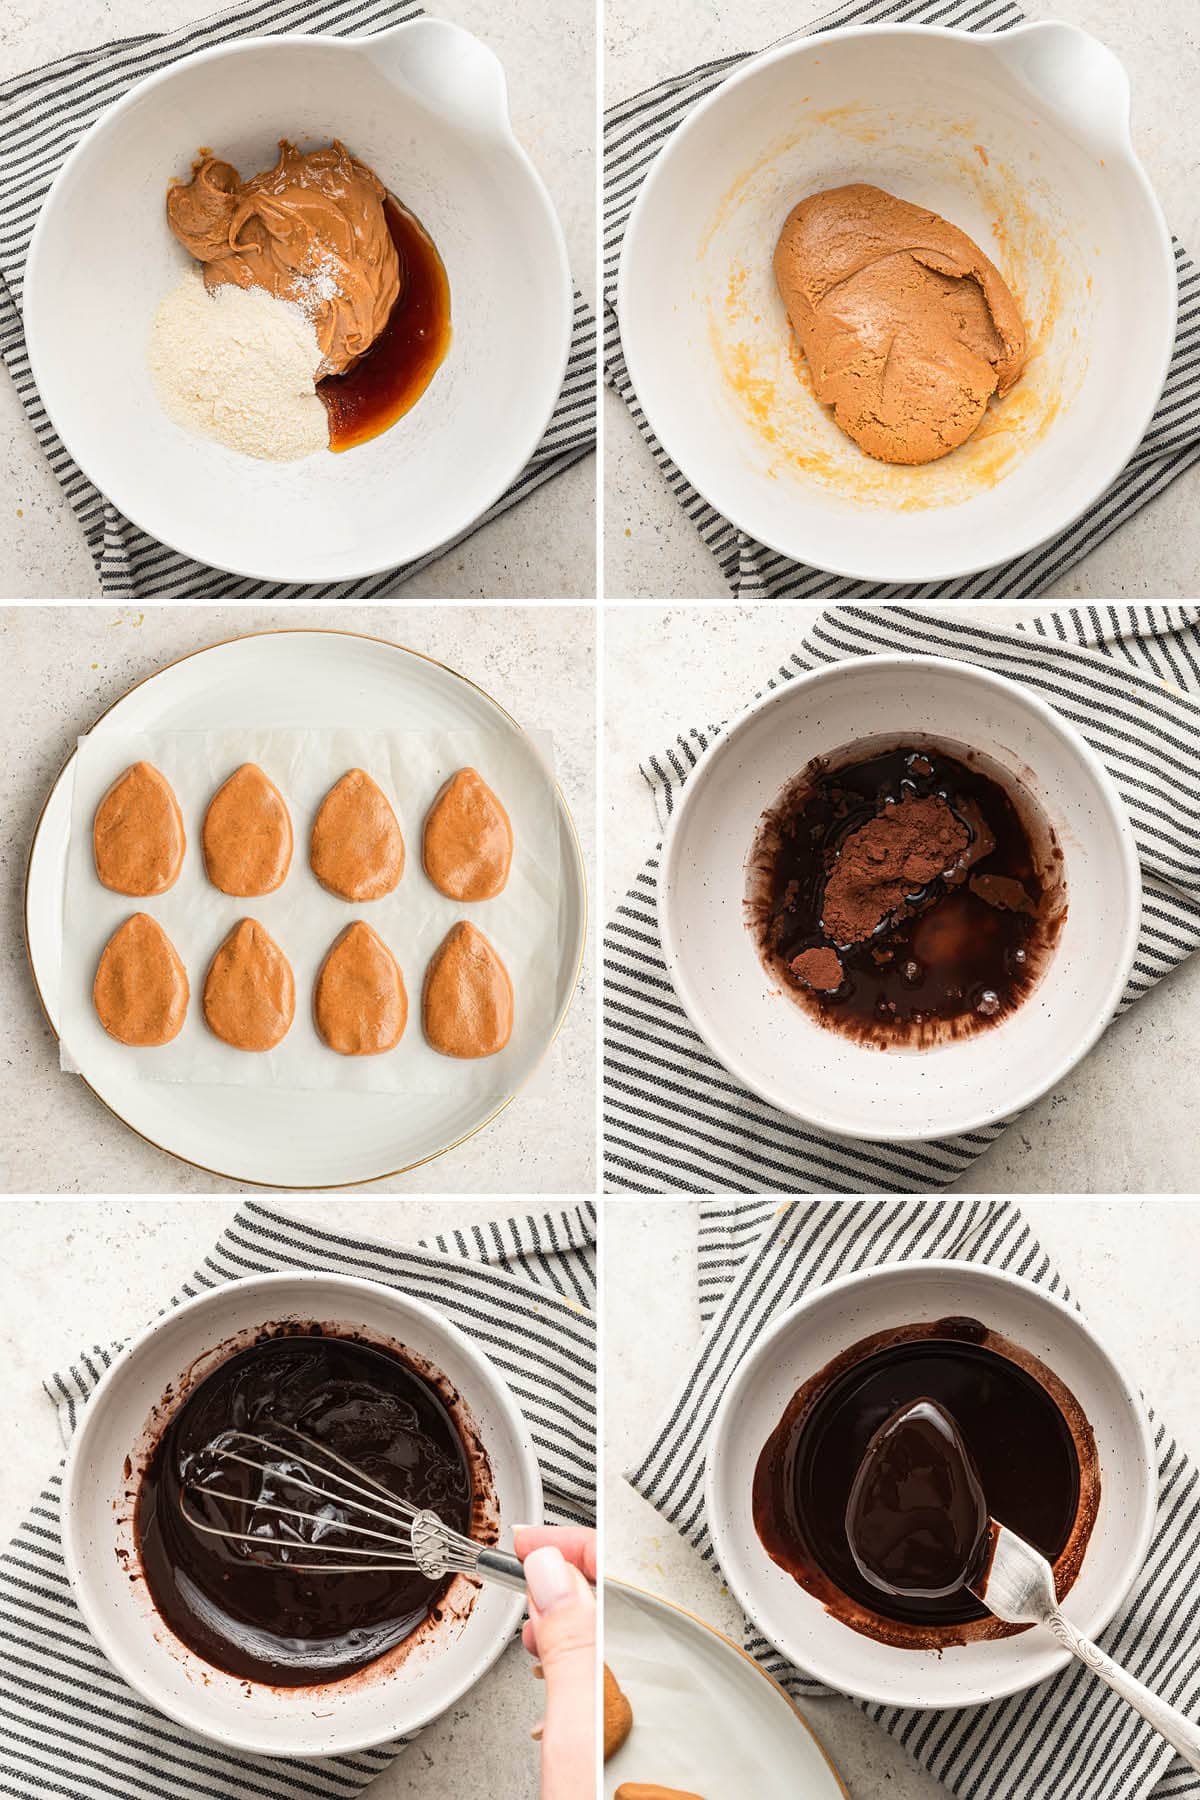 Collage of six photos showing the steps to make Healthy Peanut Butter Eggs: making peanut butter filling, forming into egg shapes, making chocolate coating and then dipping the peanut butter egg in the chocolate dip.